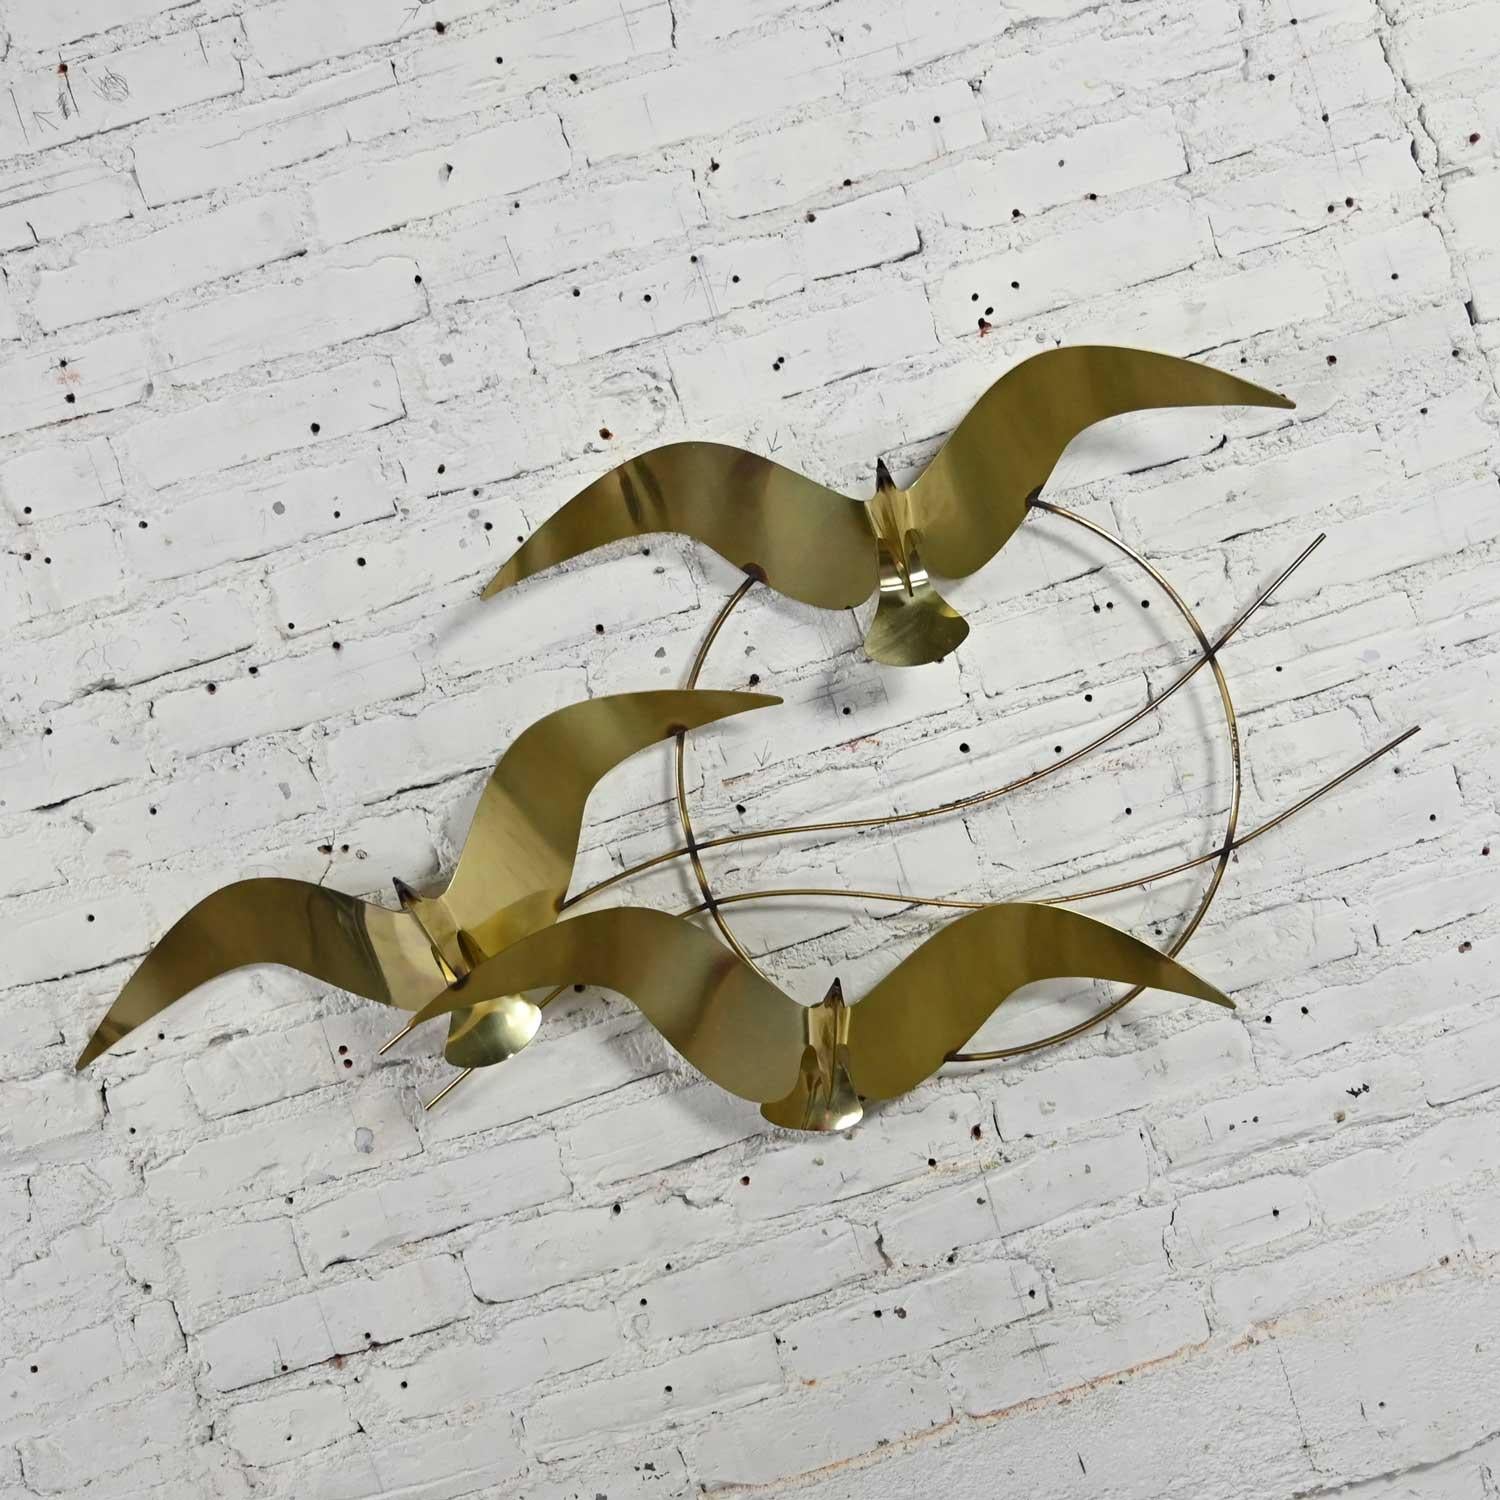 C Jere Brass Plated Bird Flock of Seagulls Wall Sculpture Signed Dated 1985 For Sale 2